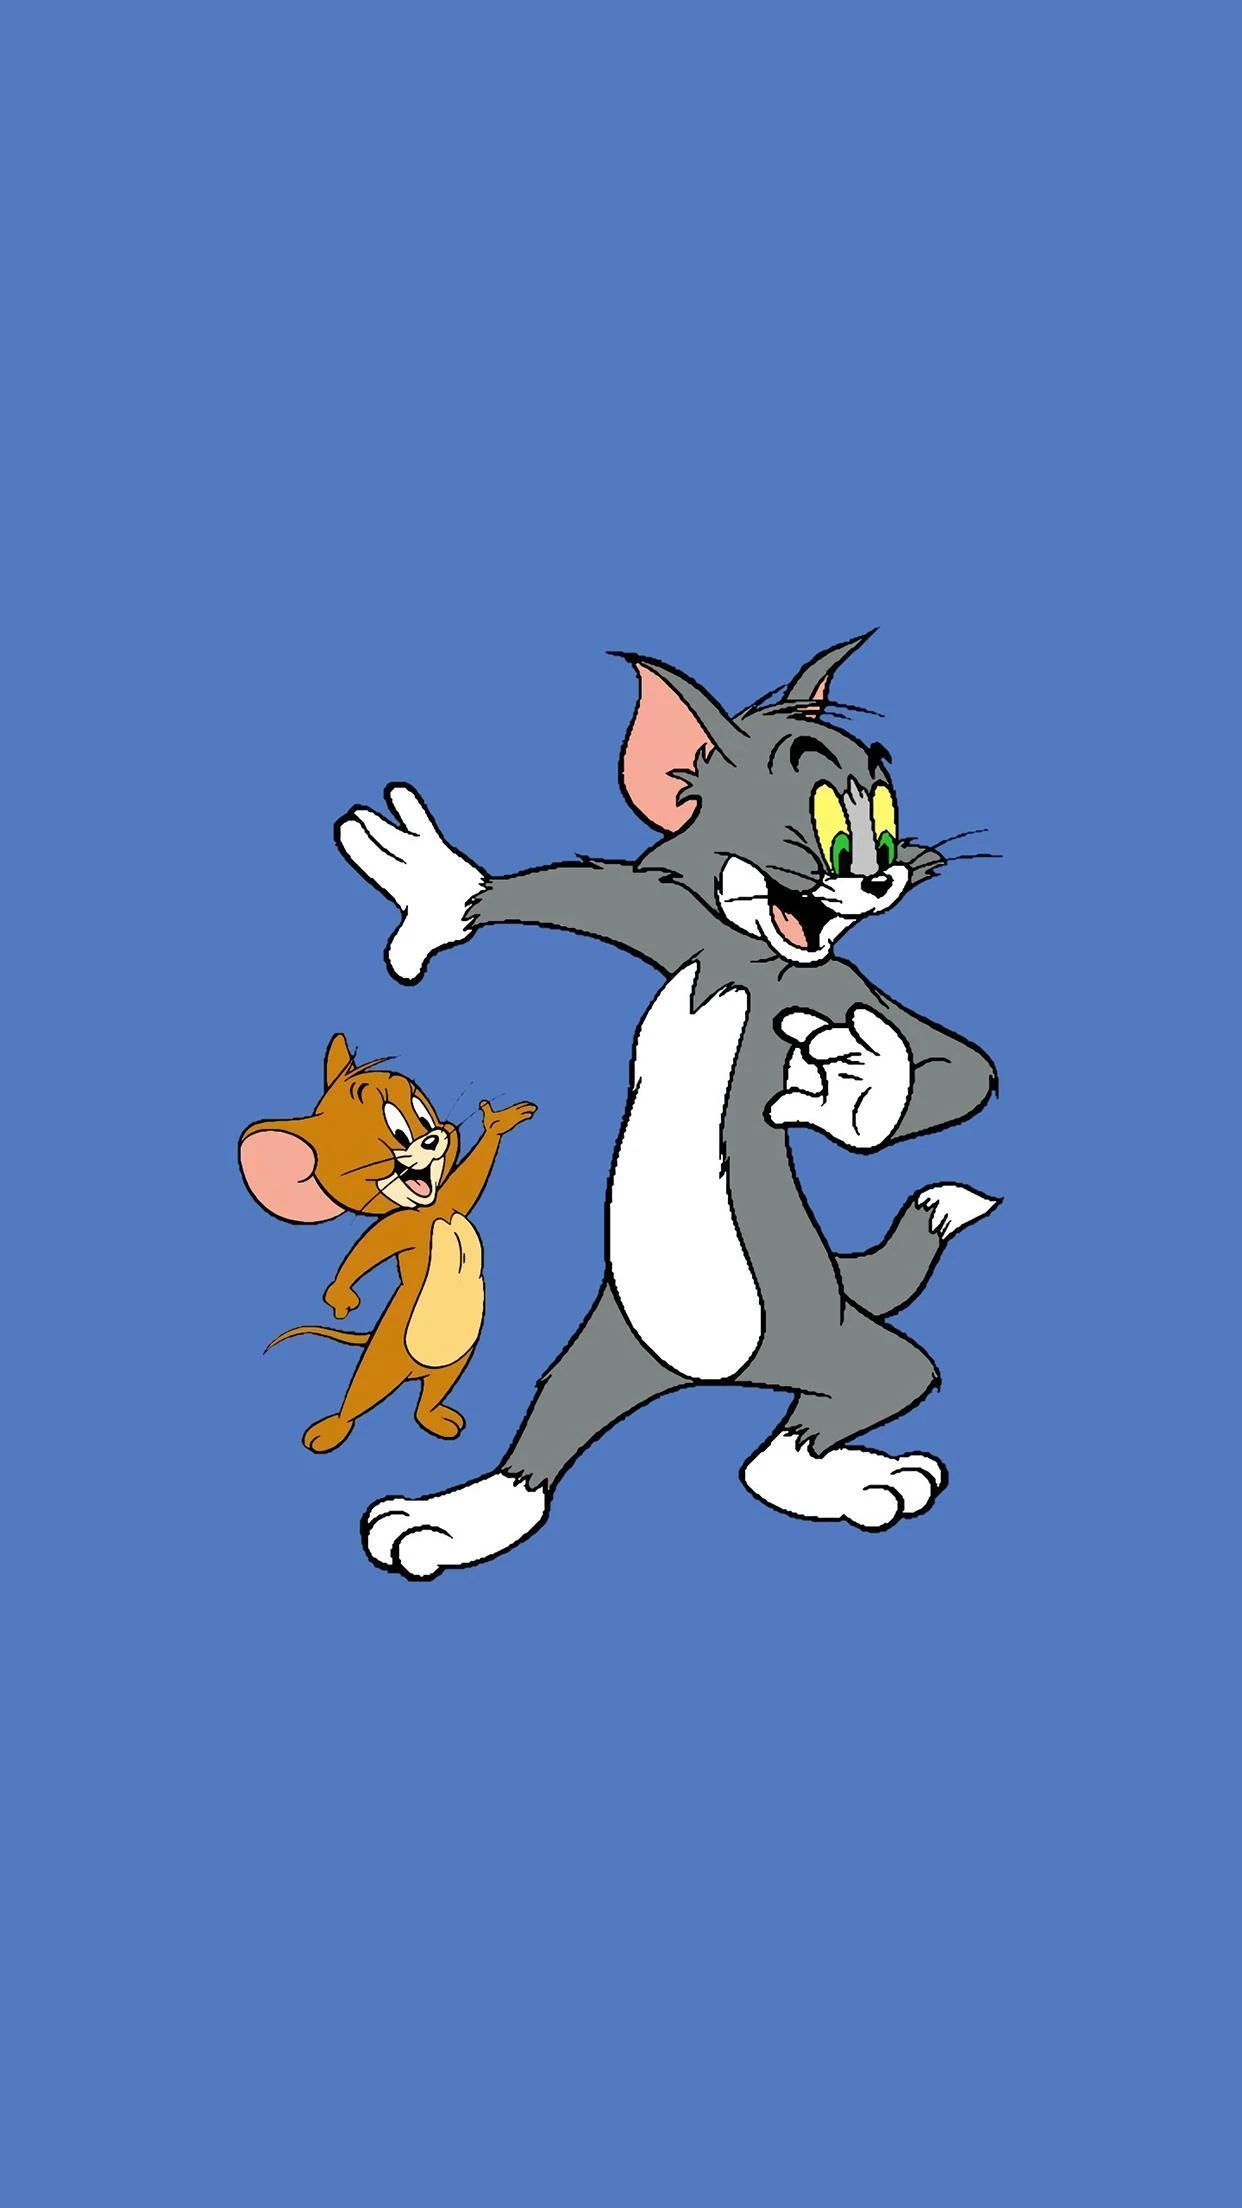 Phone Wallpaper to Commemorate Tom and Jerry's Animator Gene Deitch. Tom and jerry wallpaper, Tom and jerry, Cute cartoon drawings